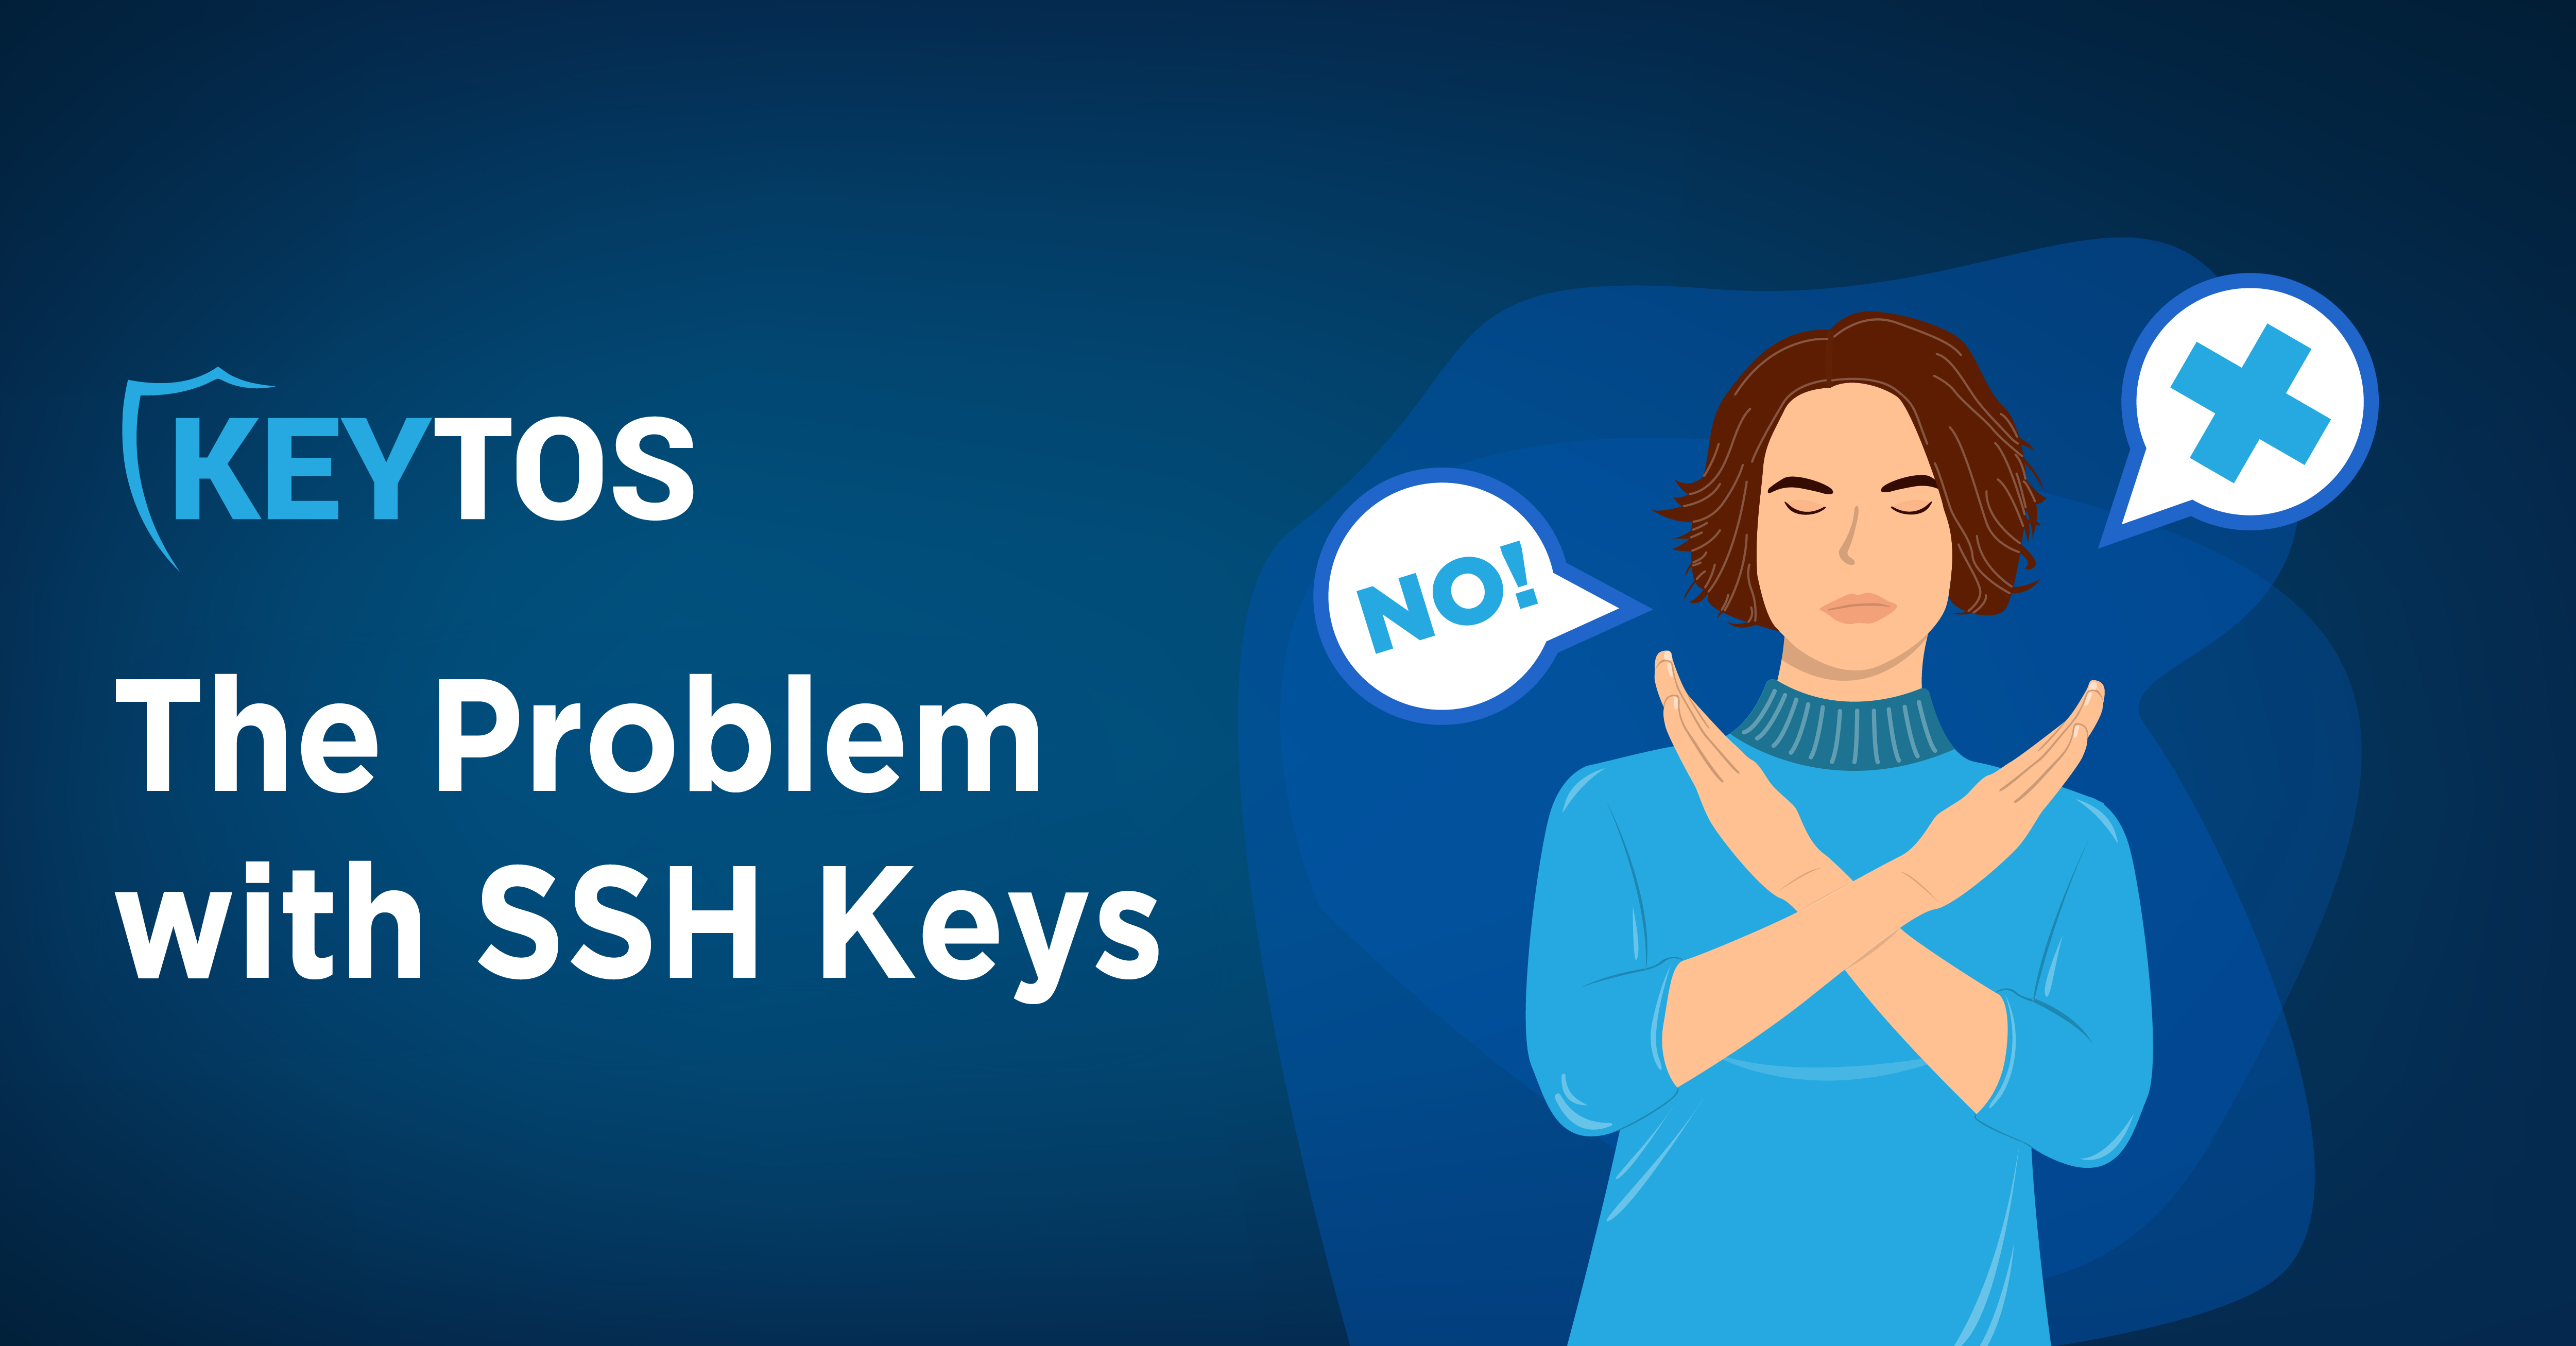 What is the Problem With SSH Keys?